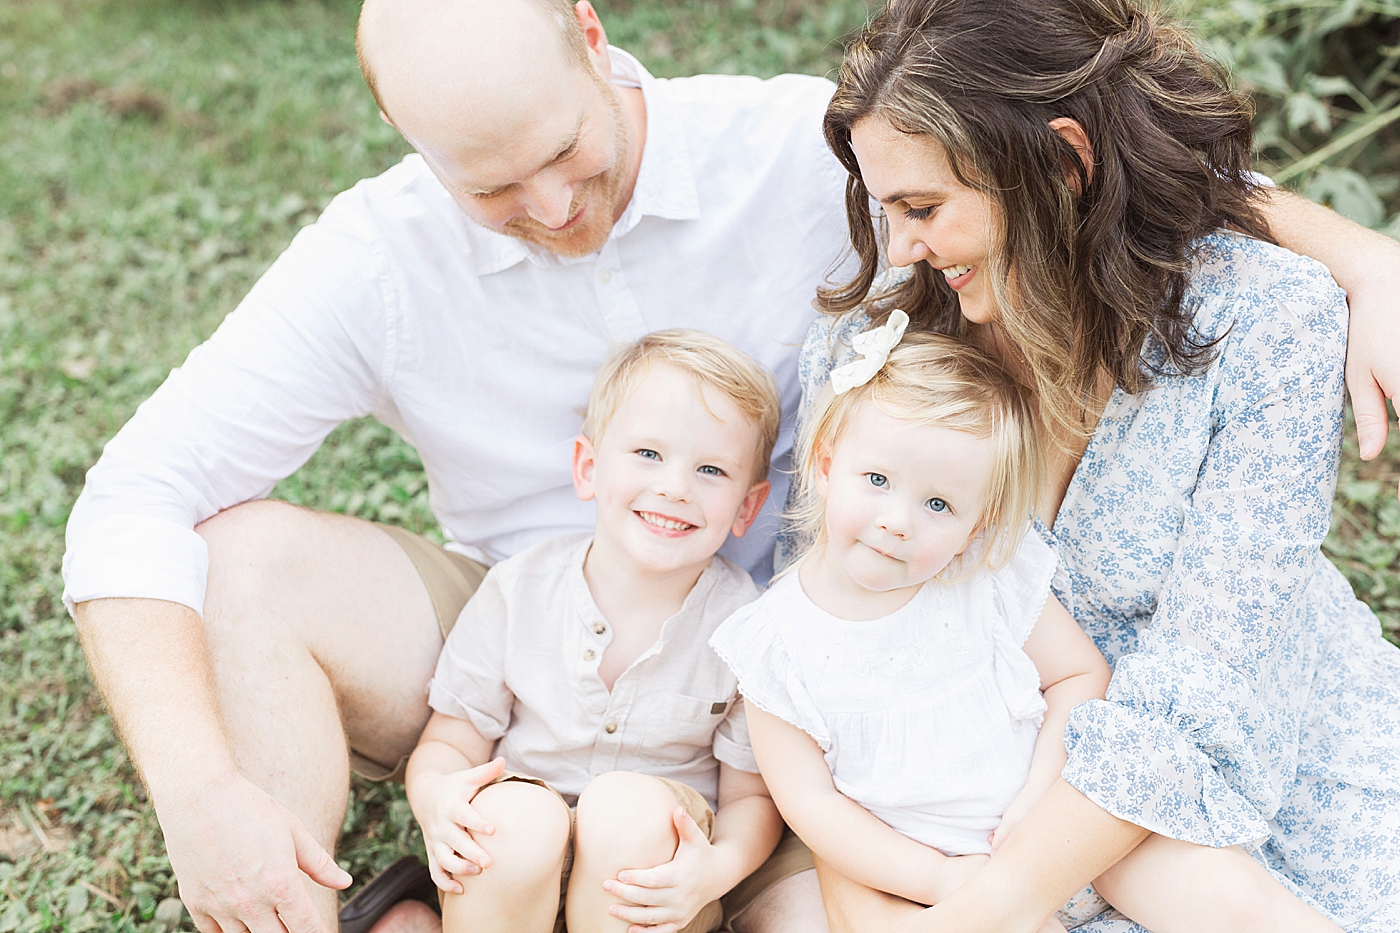 Outdoor family pictures in Houston at sunset with Fresh Light Photography.